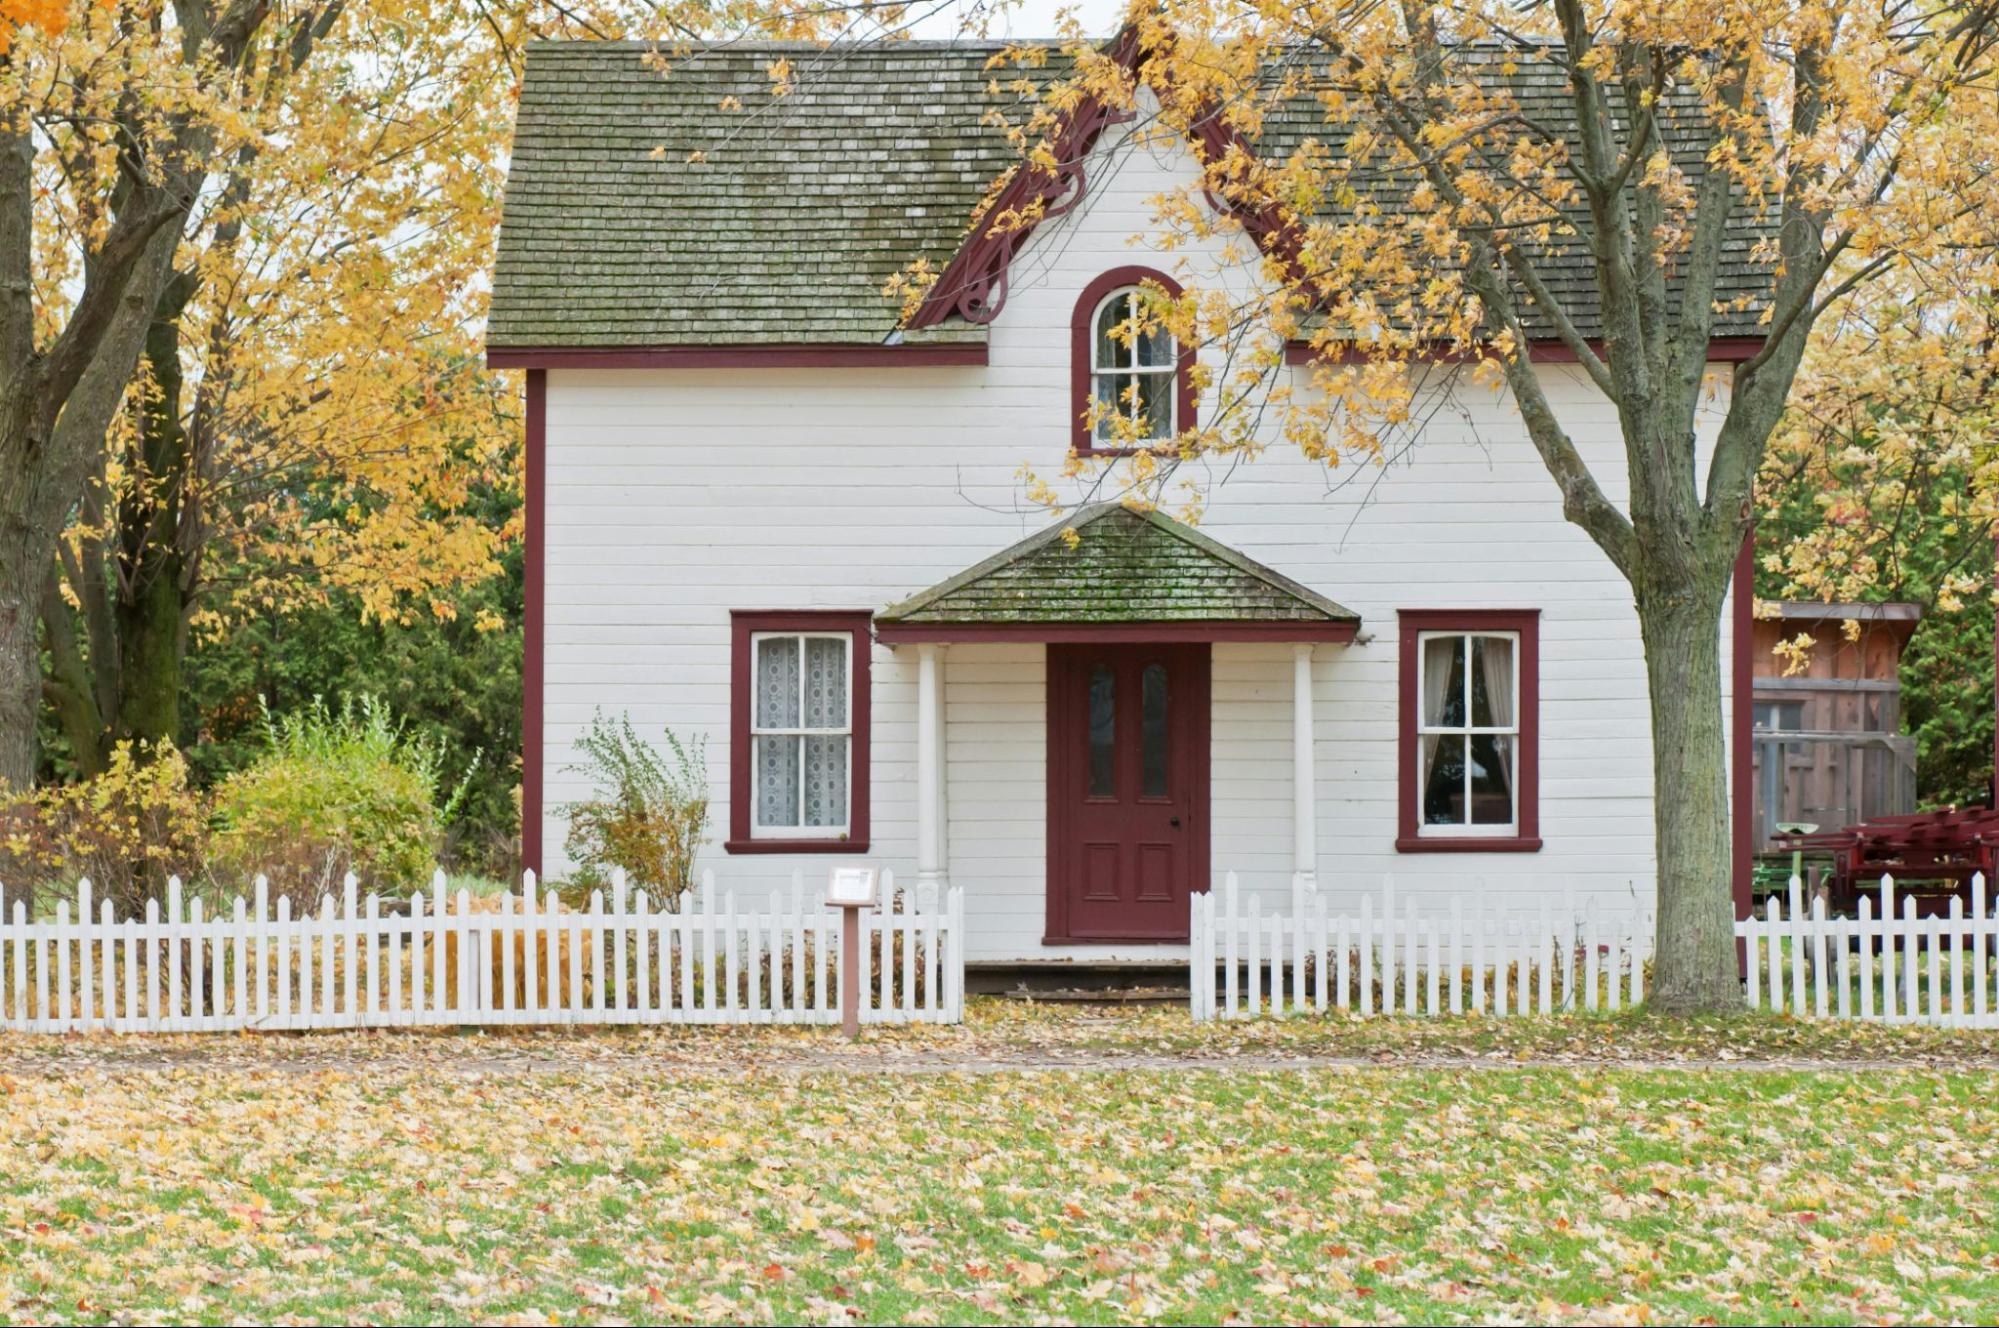 Exterior of a White Home with Picket Fence